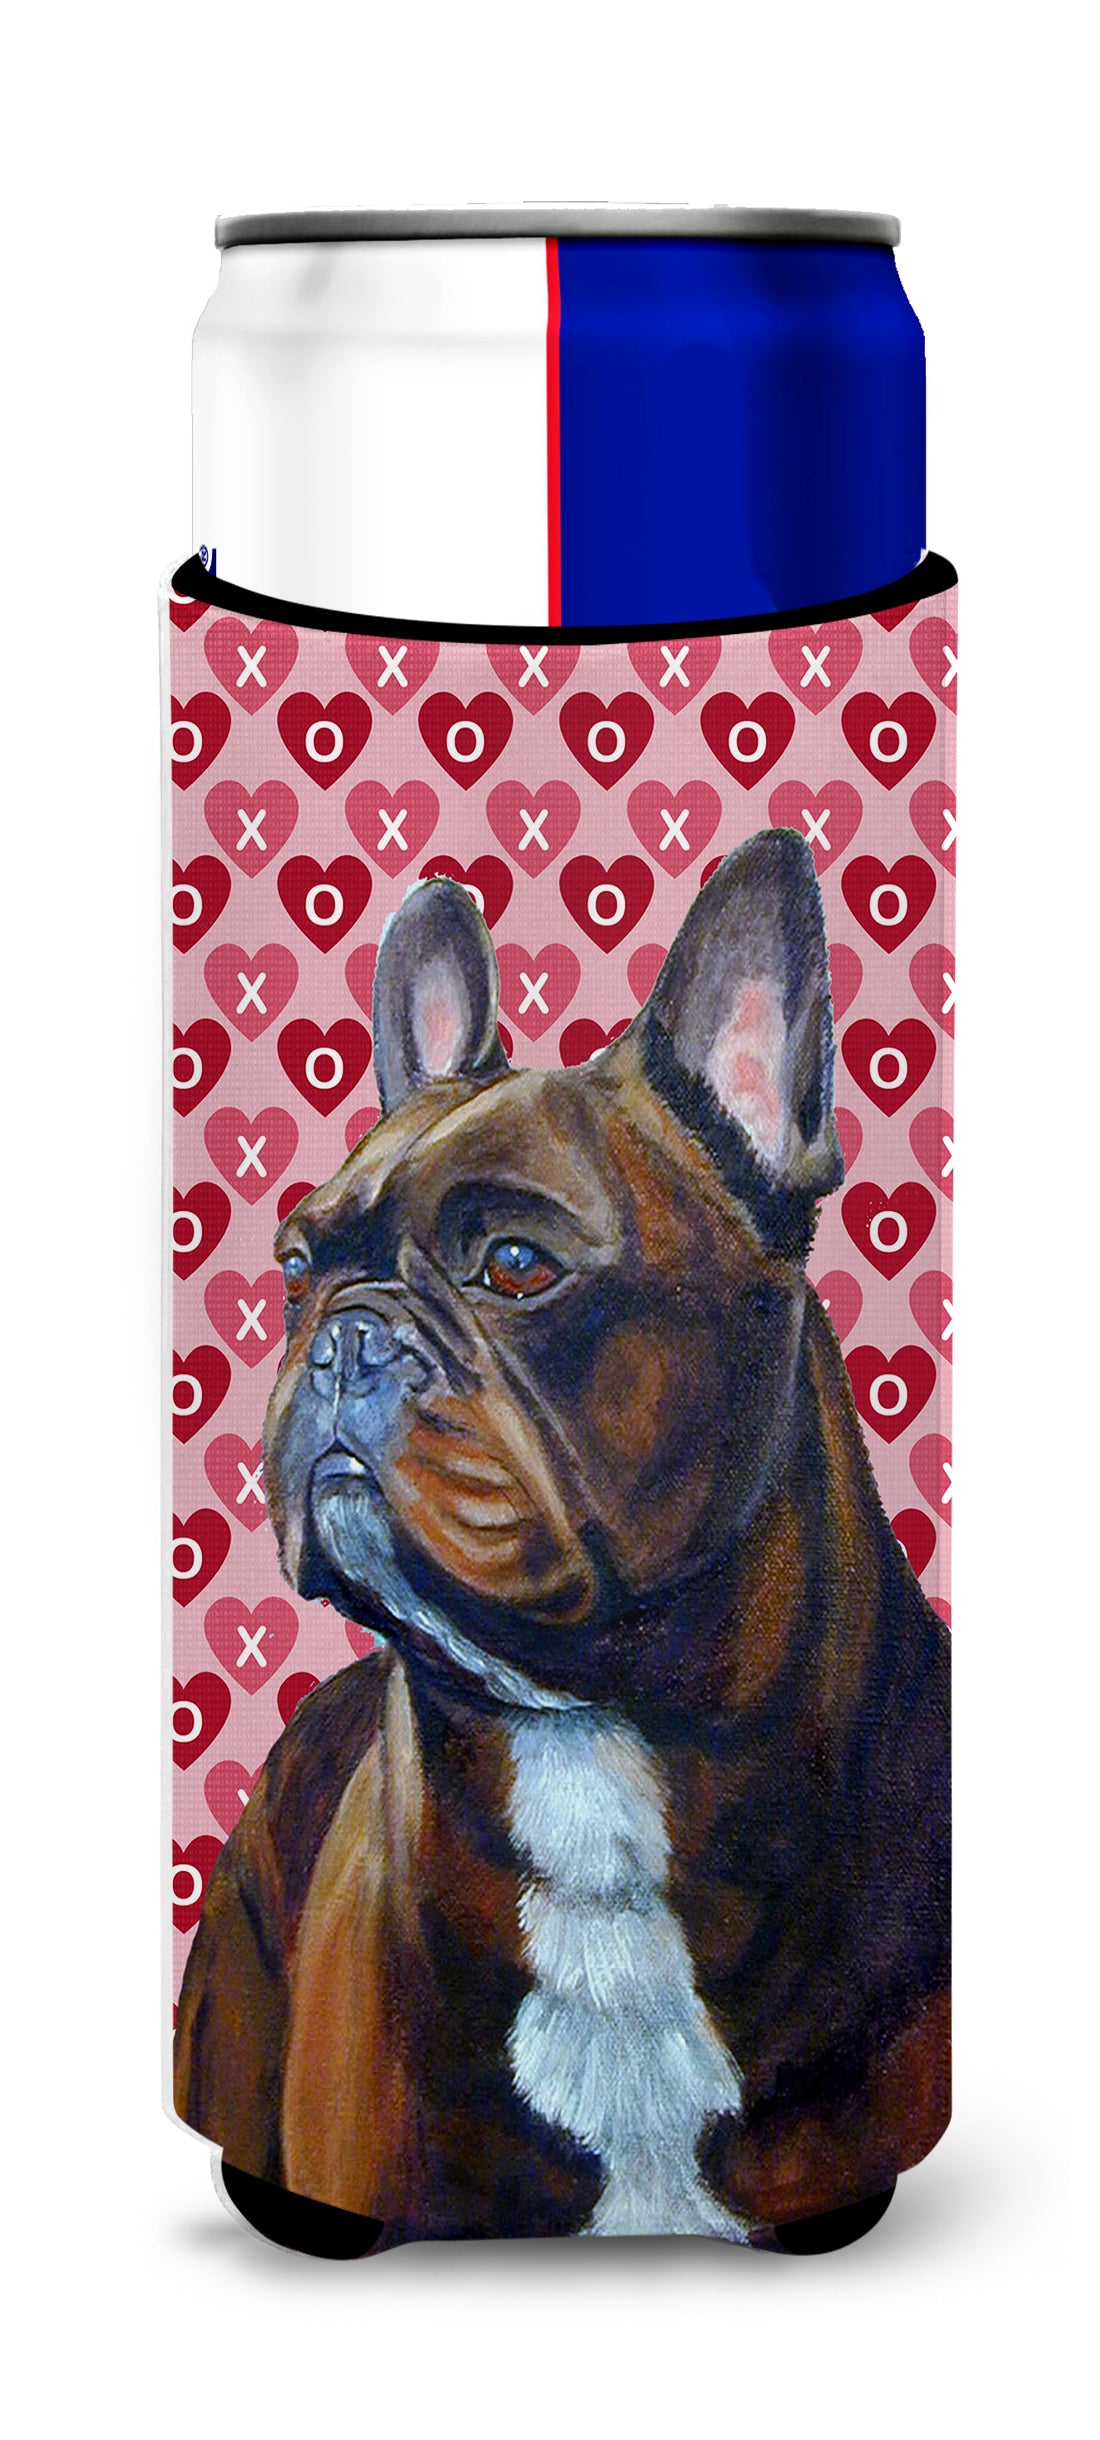 French Bulldog Hearts Love and Valentine's Day Portrait Ultra Beverage Insulators for slim cans LH9160MUK.